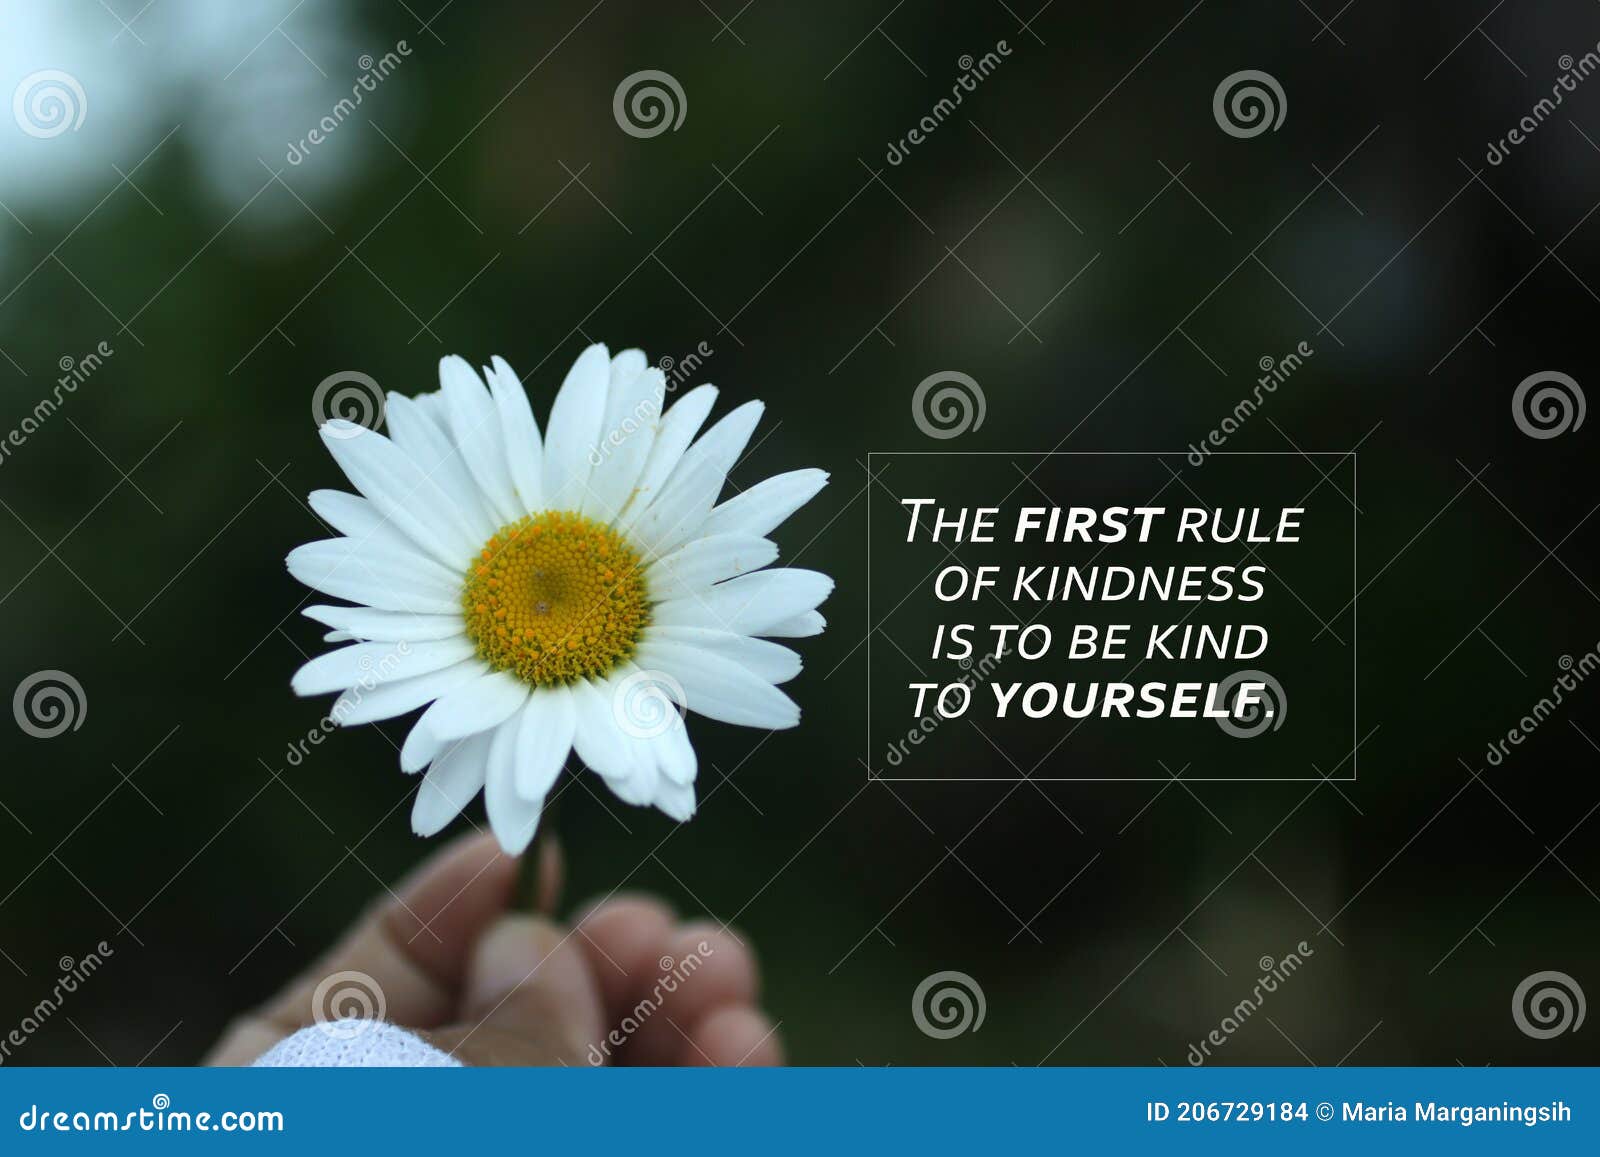 inspirational quote - the first rule of kindness is to be kind to yourself. self love care, healing concept with flower in hand.